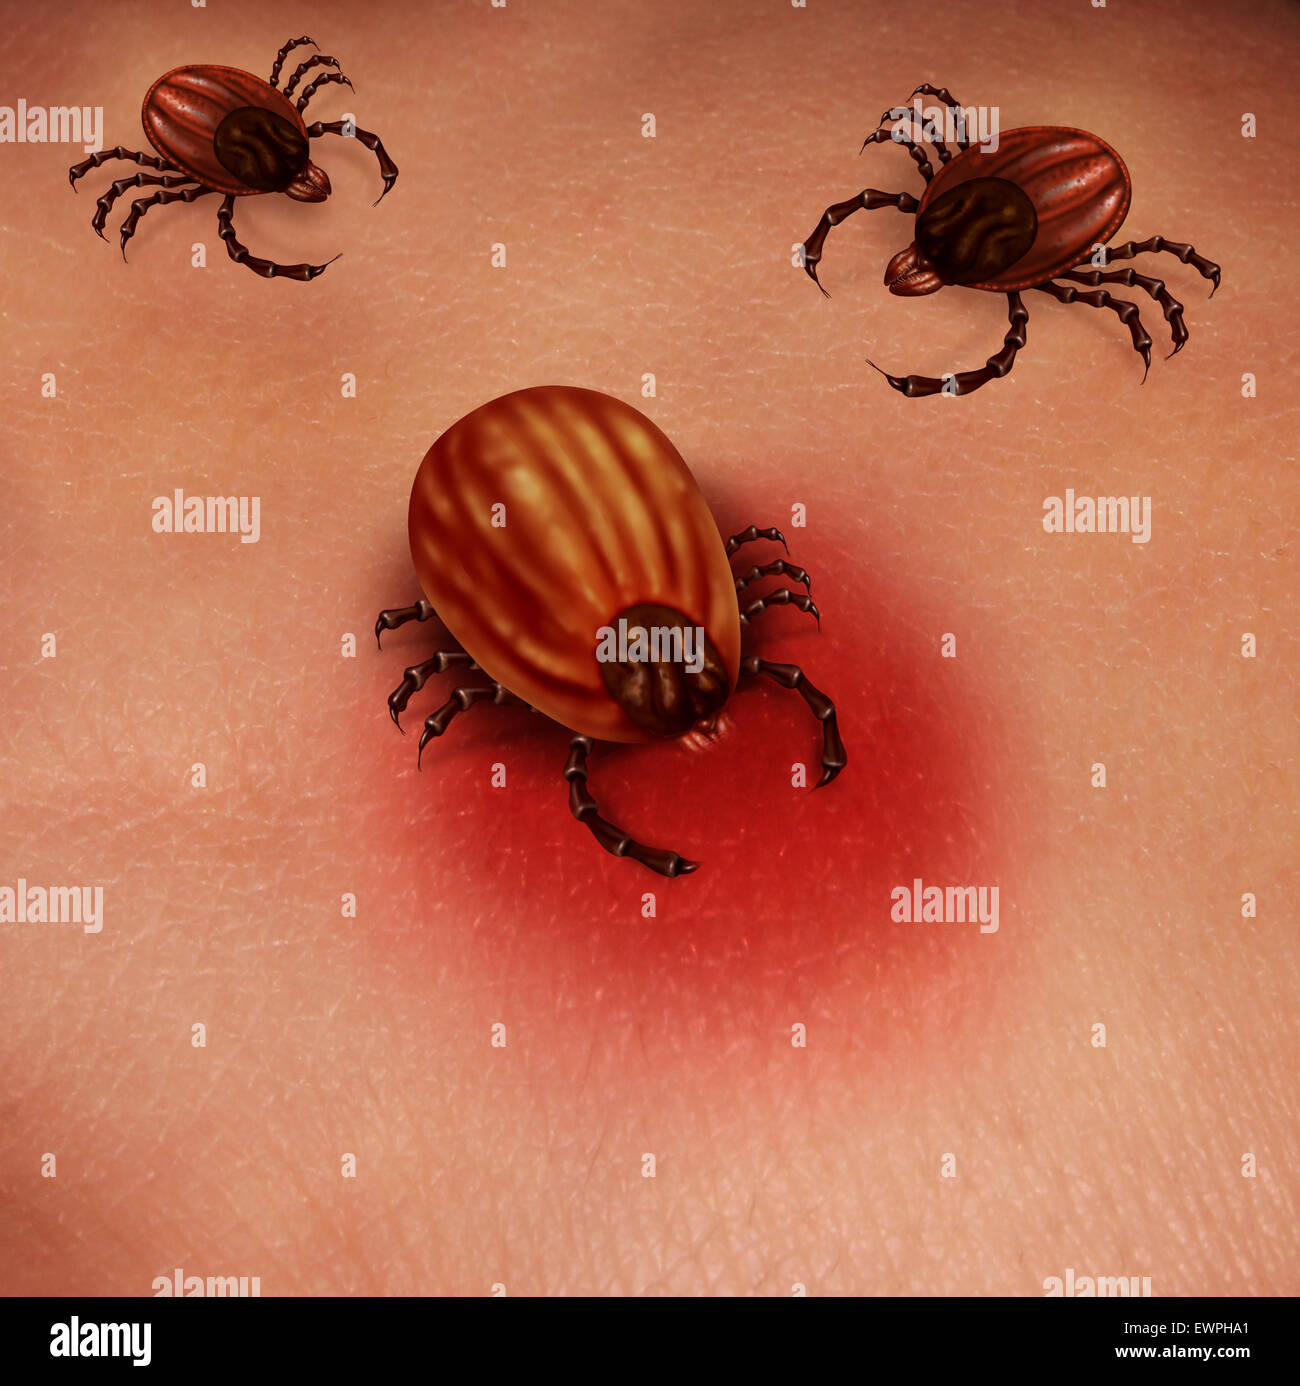 Lyme disease human tick concept as a female insect feeding for blood on the skin of a human host as a health care issue for bacterial infection and dangers of infection from ticks found in nature. Stock Photo